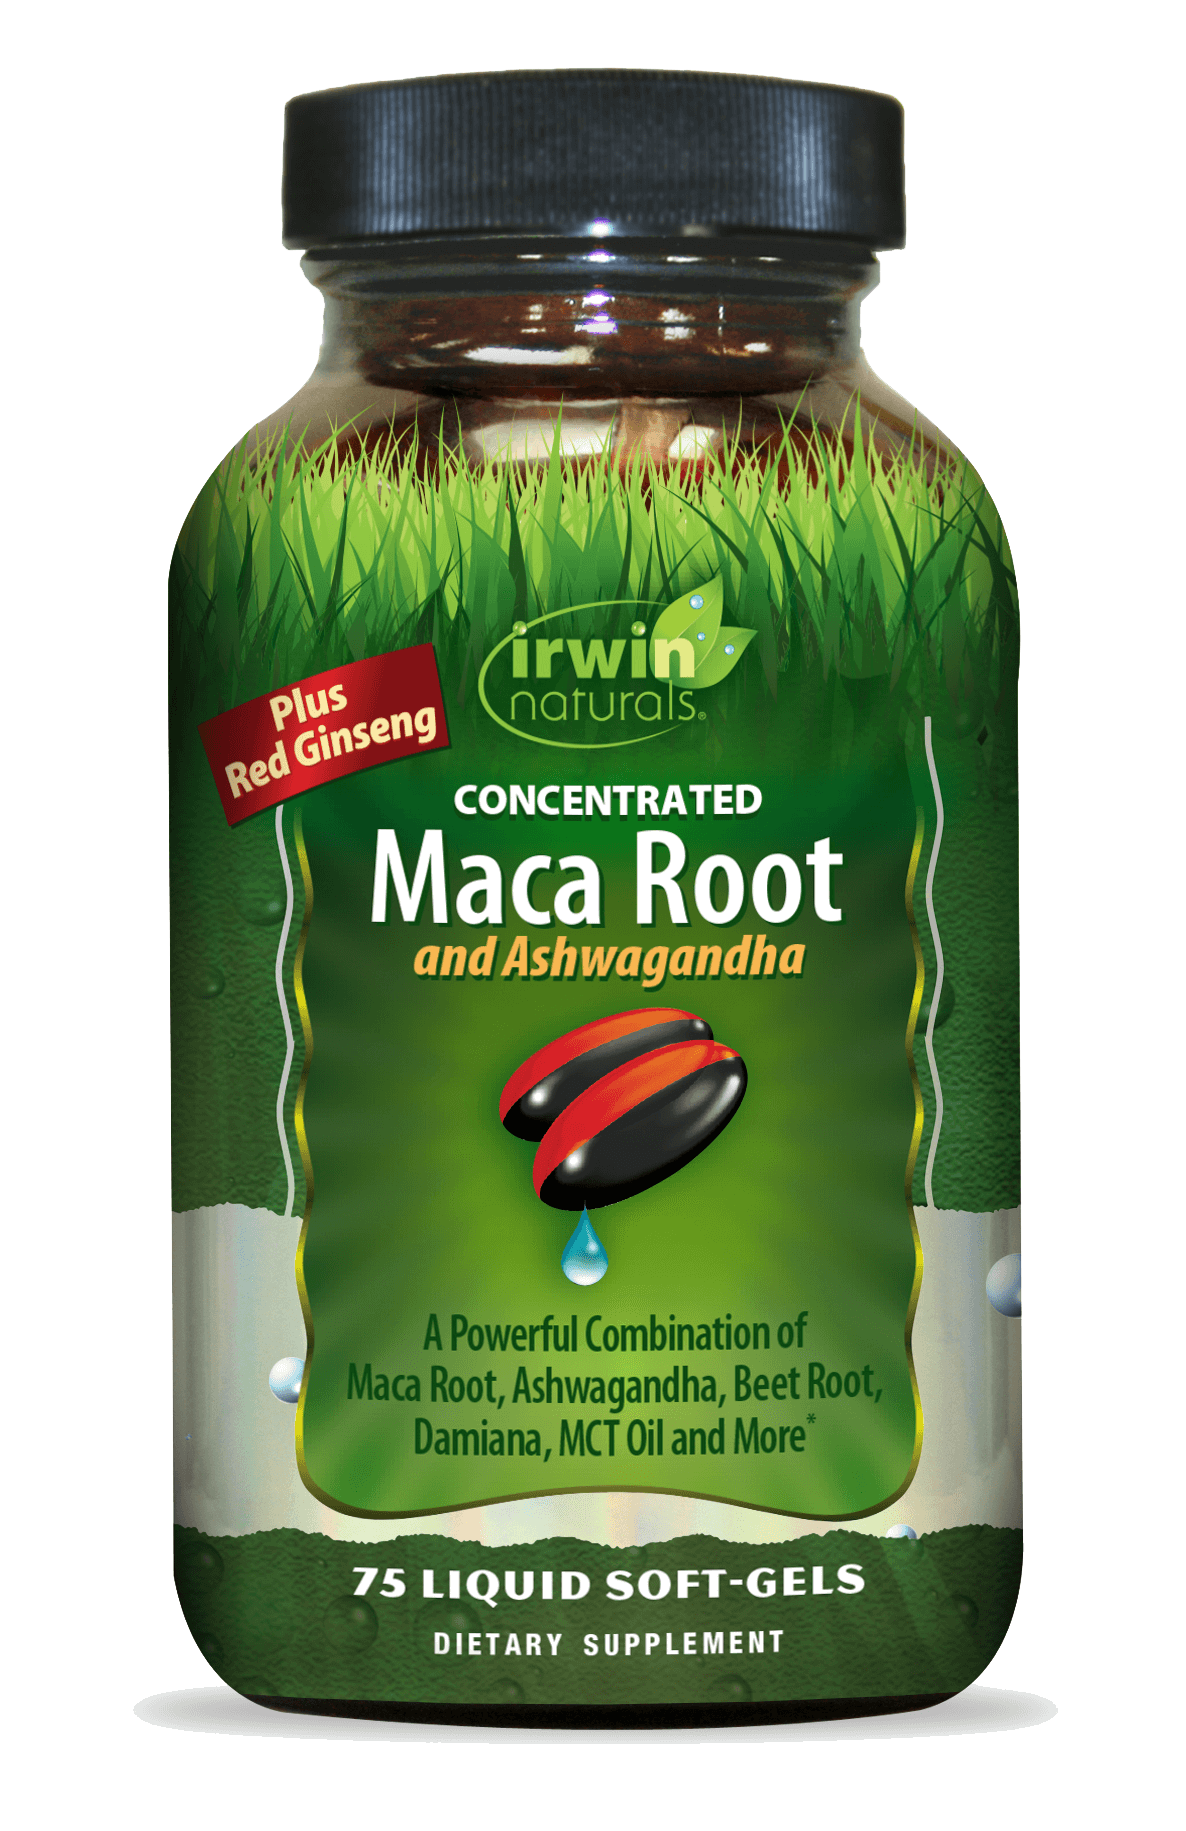 Concentrated Maca Root and Ashwagandha Plus Red Ginseng by Irwin Naturals